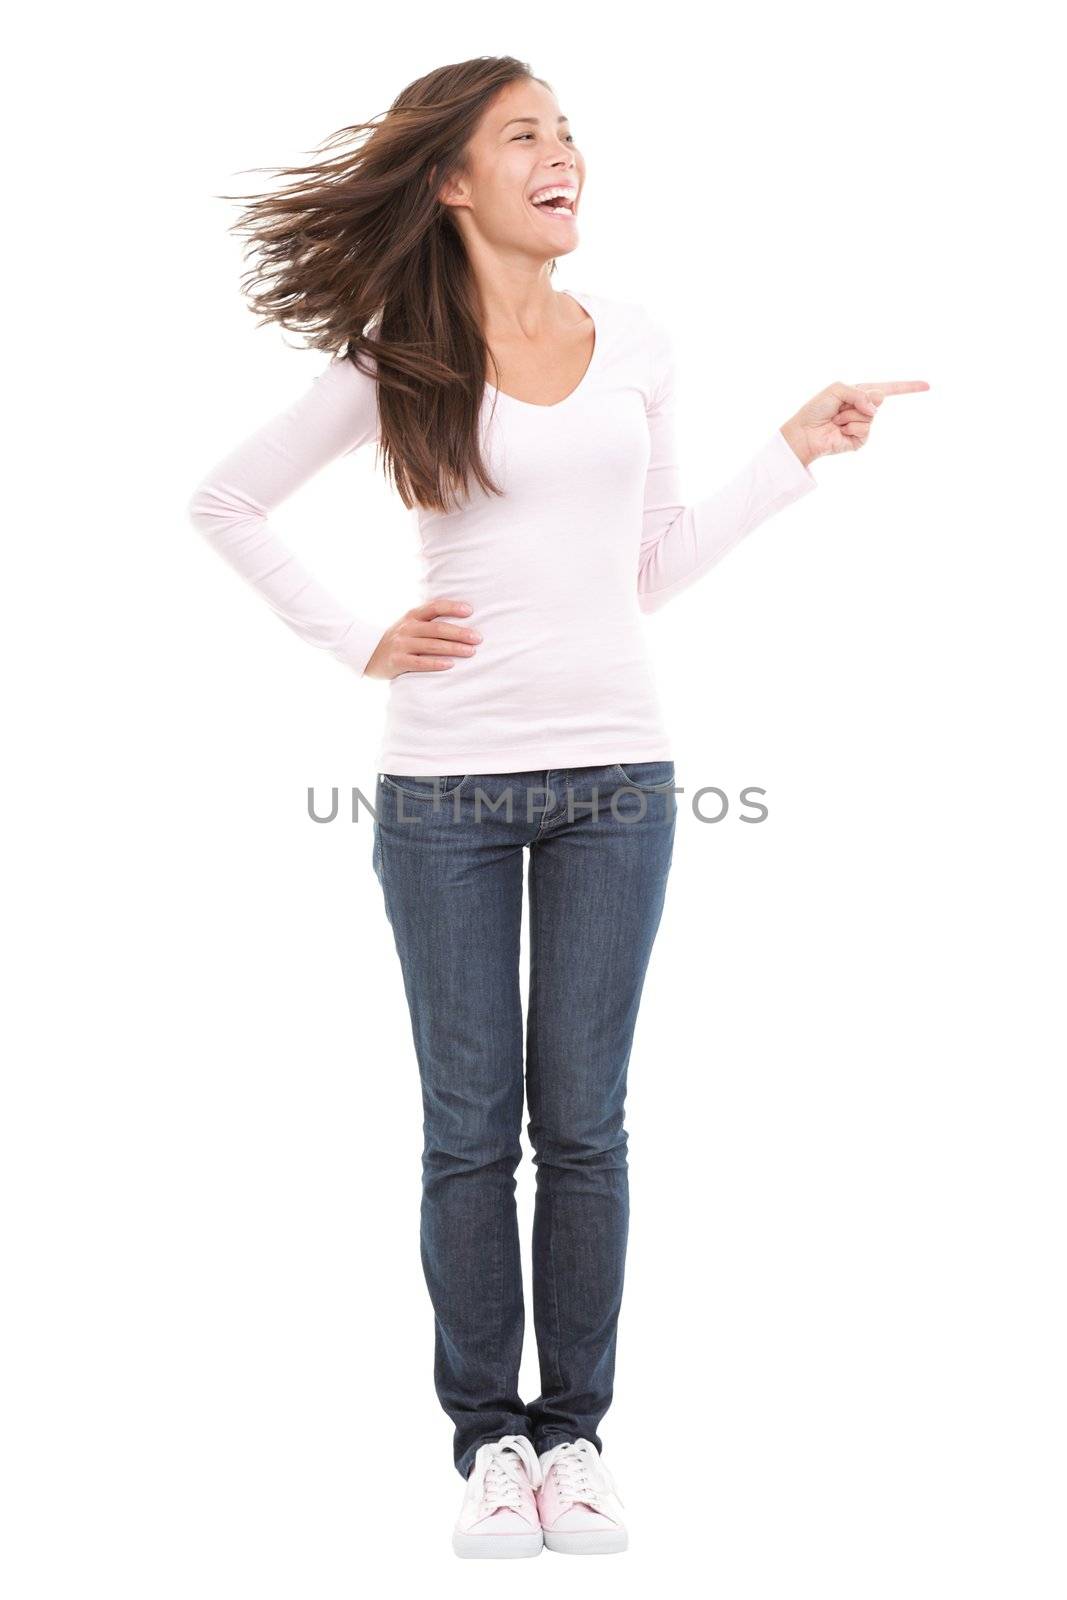 Funny and excited woman laughing and pointing. Beautiful mixed race asian / caucasian model in full length. Isolated on white background.